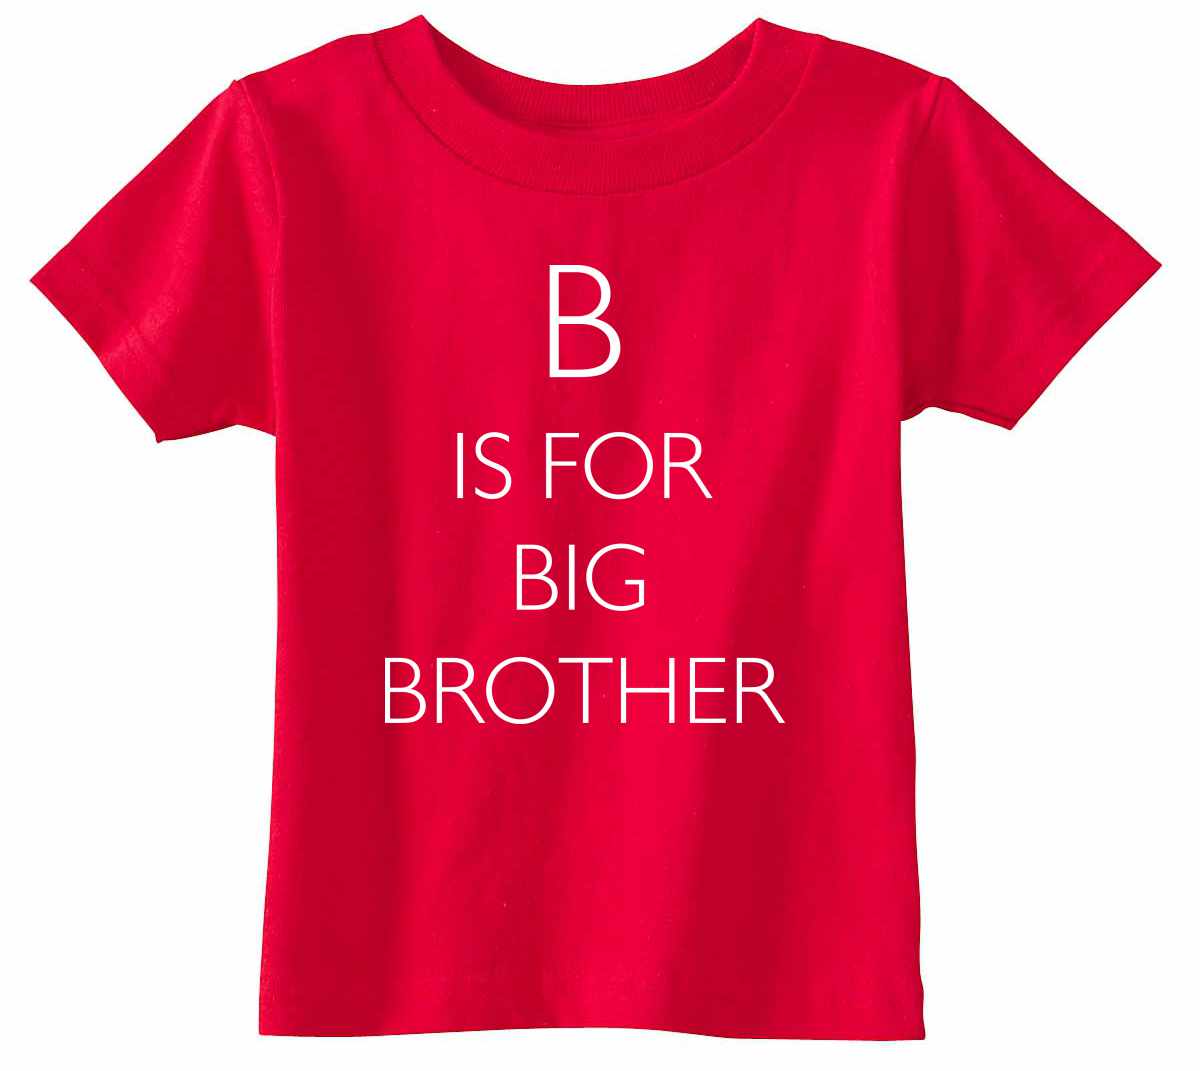 B is for Big Brother Infant/Toddler T-Shirt